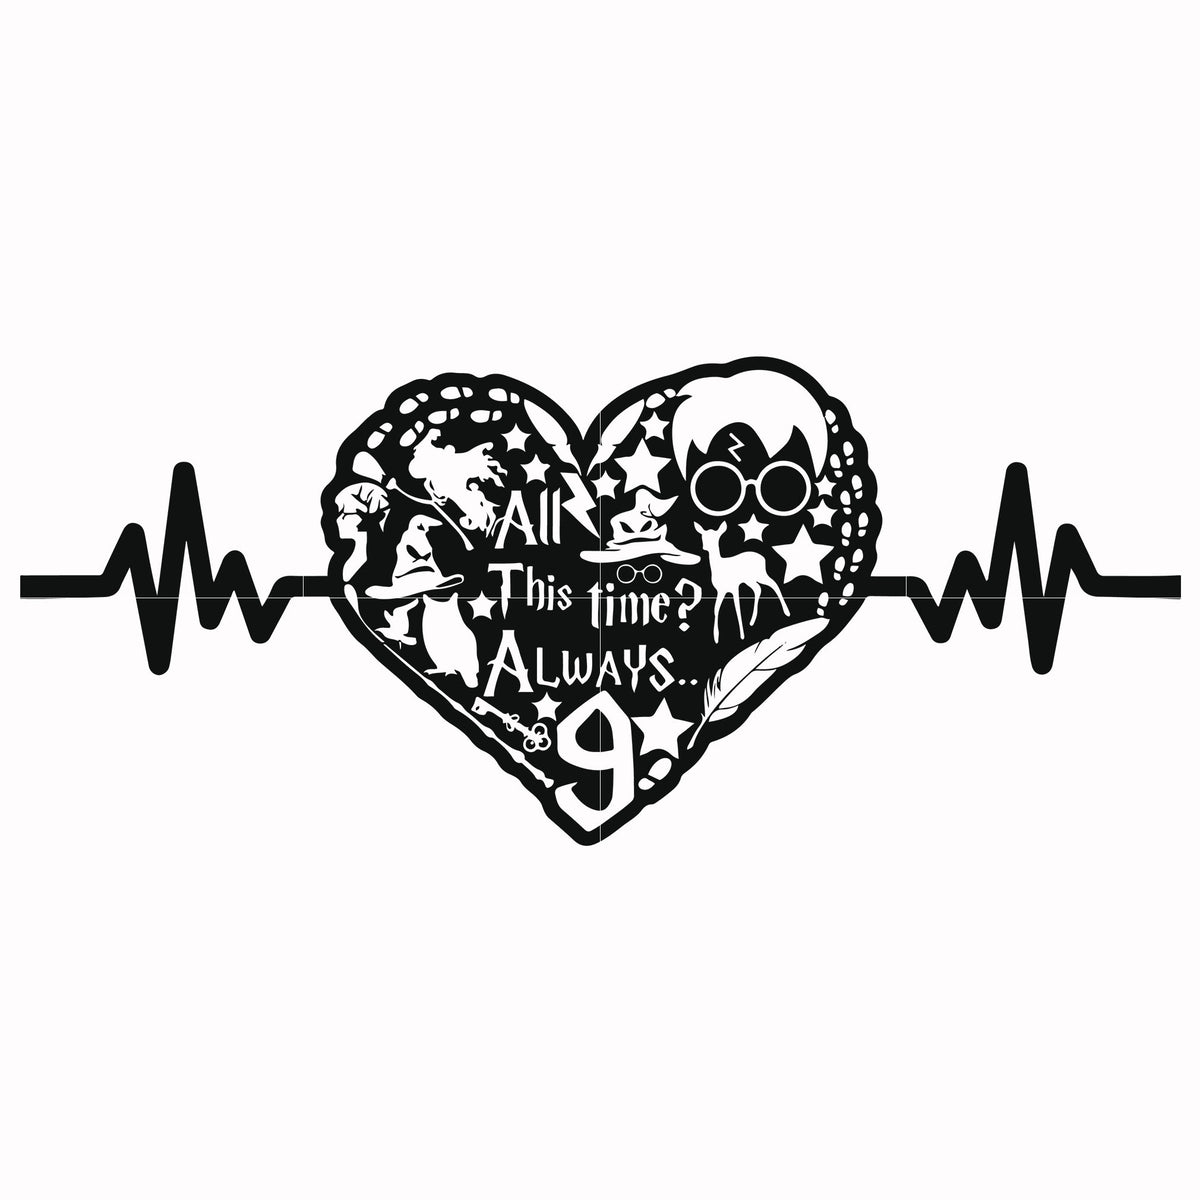 Download All this time always heart beat svg, harry potter svg ...